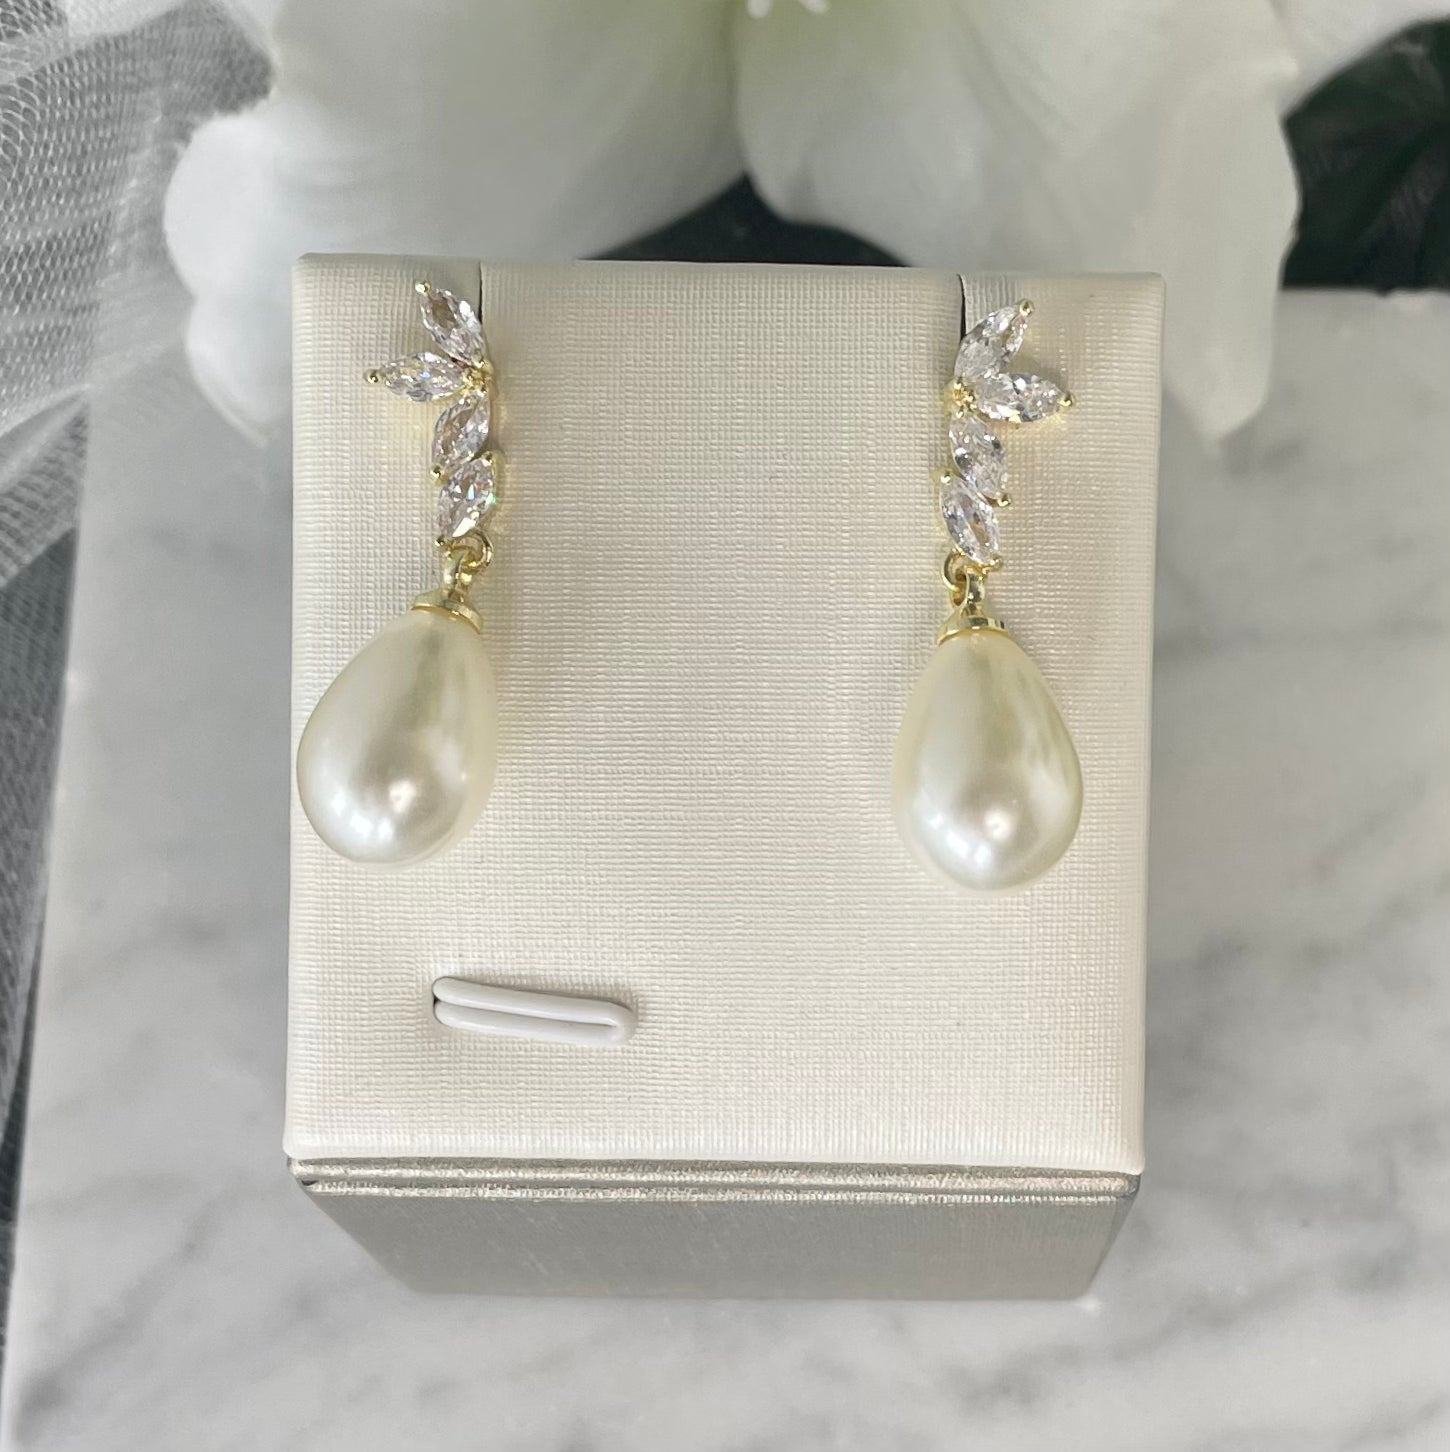 Zarina leaf-design pearl earrings with gold, diamanté, and cubic zirconia accents.